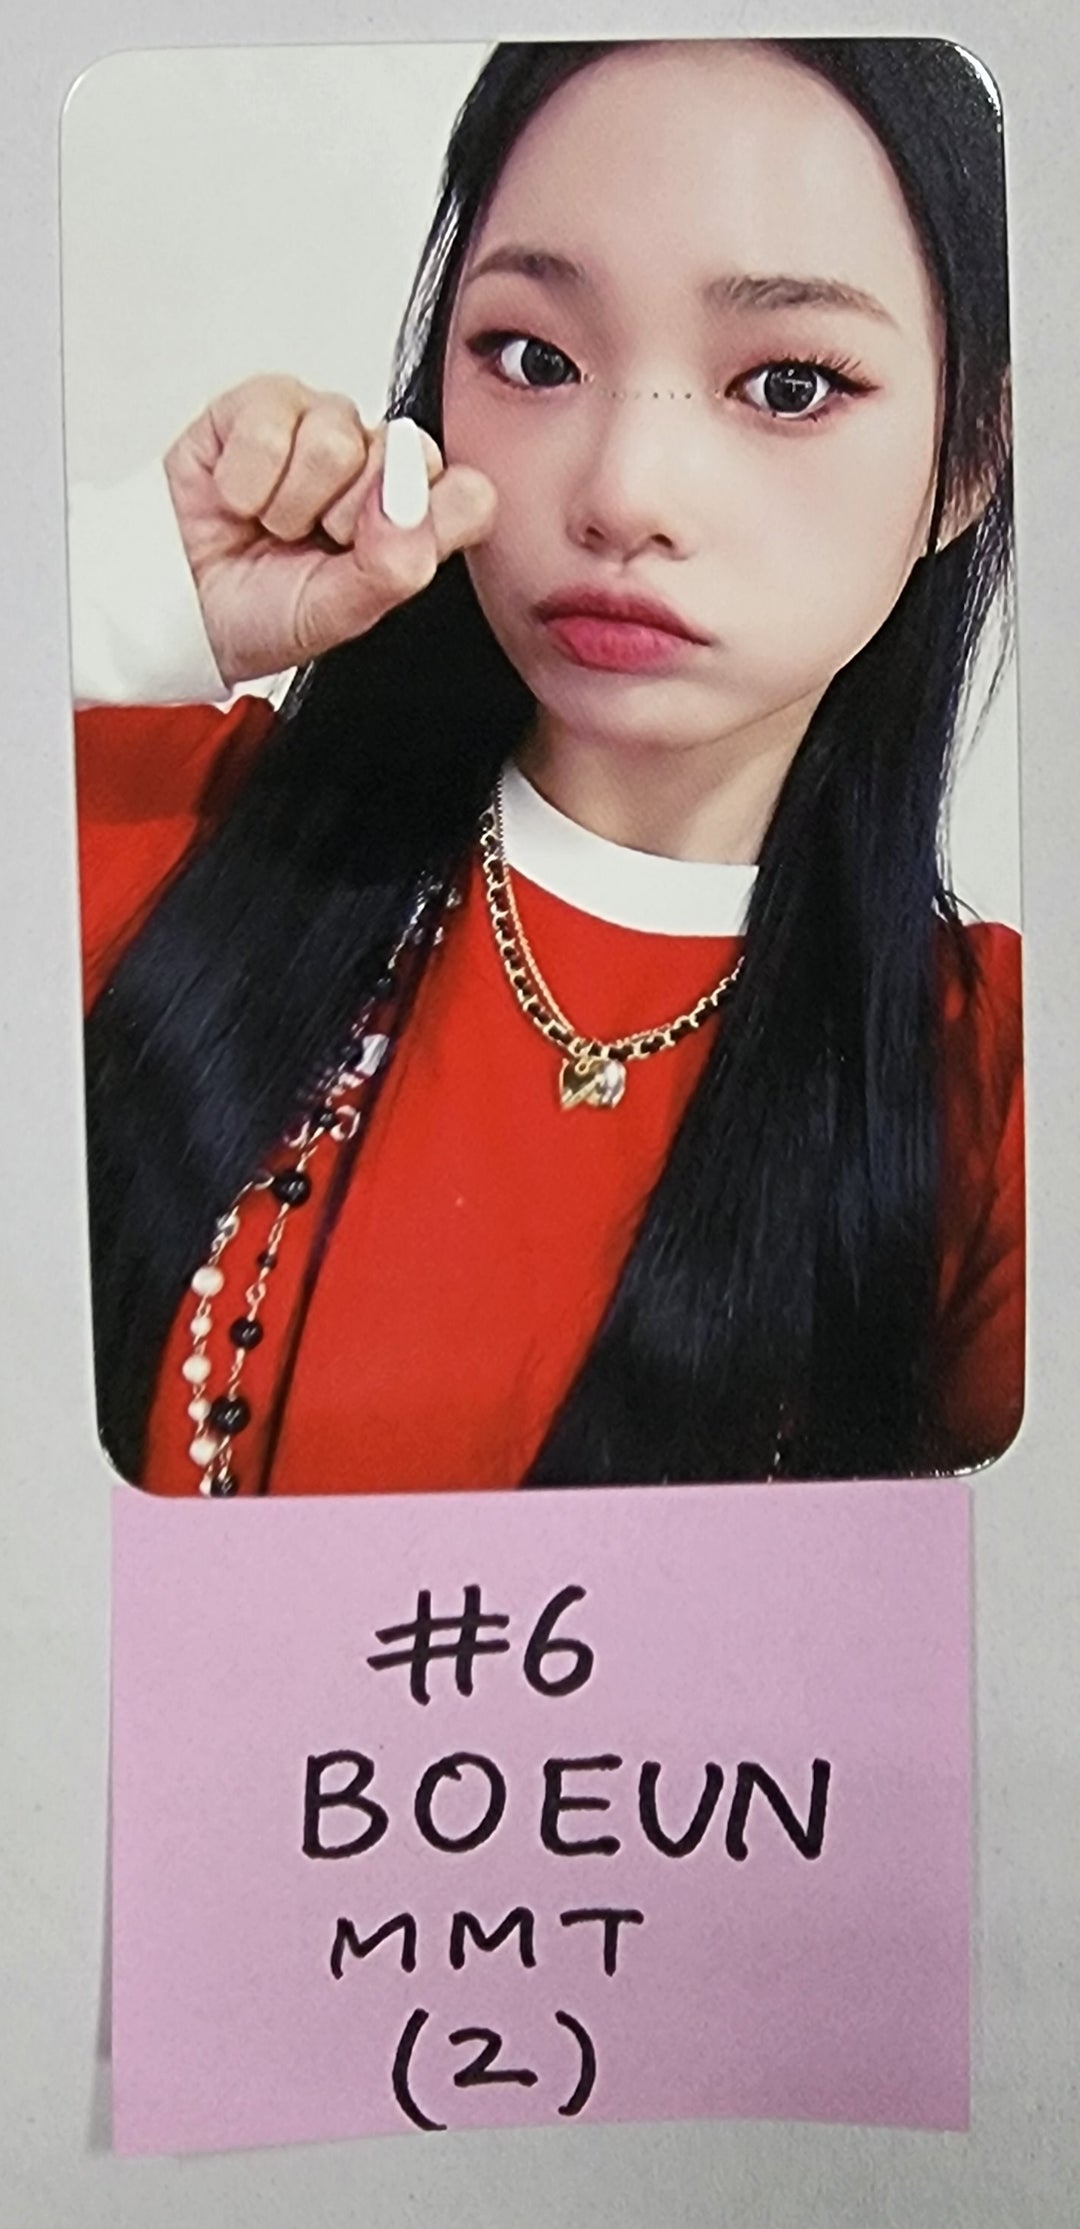 CLASS:y "Day Night" 2nd Mini Album - MMT Fansign Event Photocard